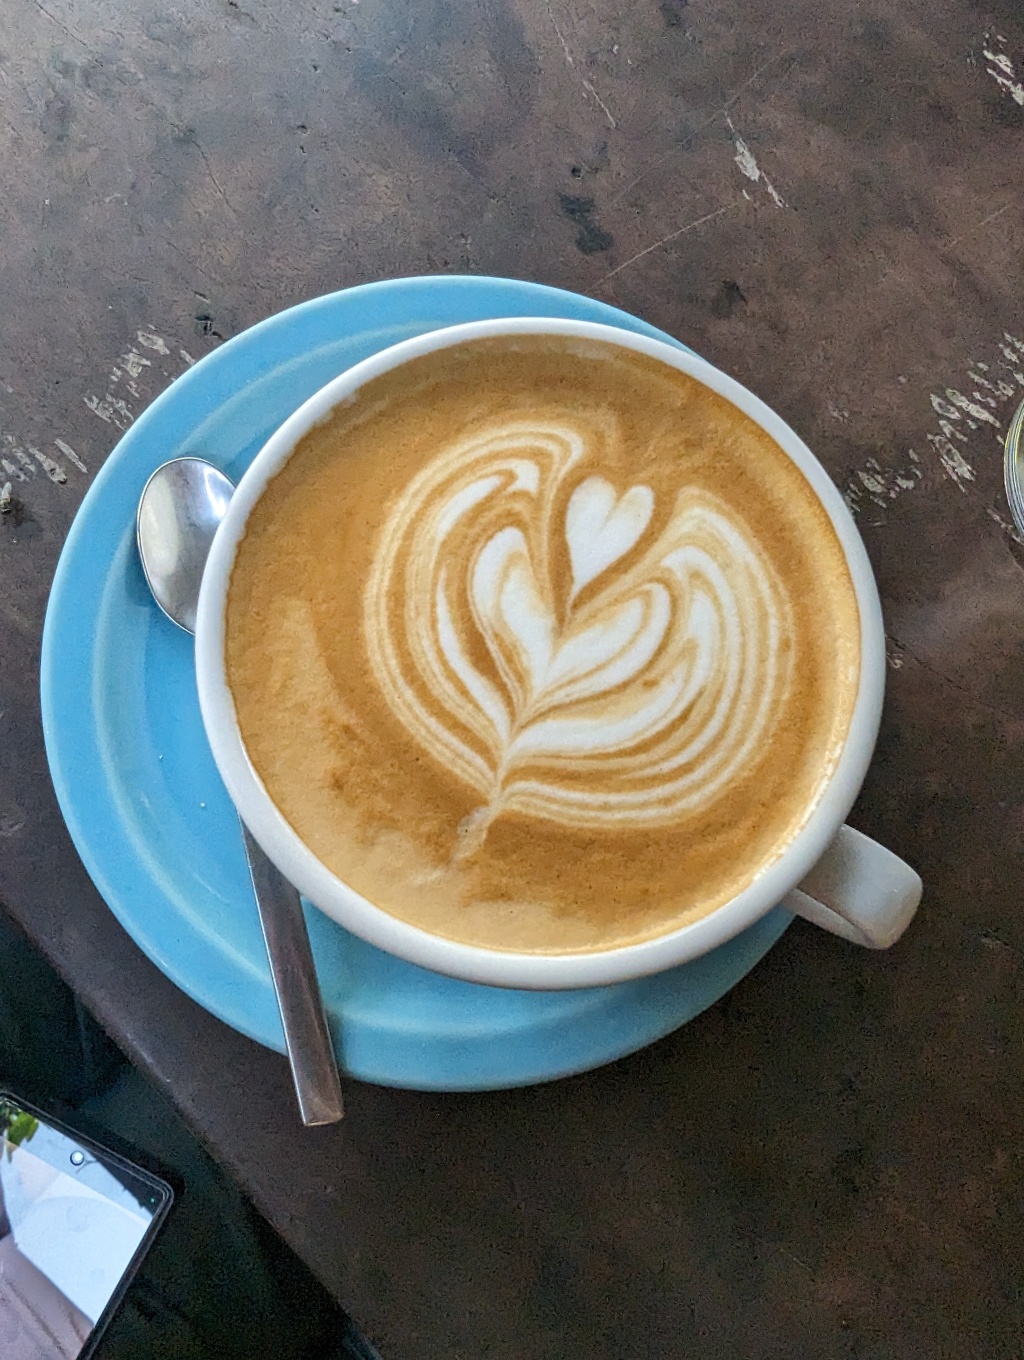 The best cafes in Chiang Mai